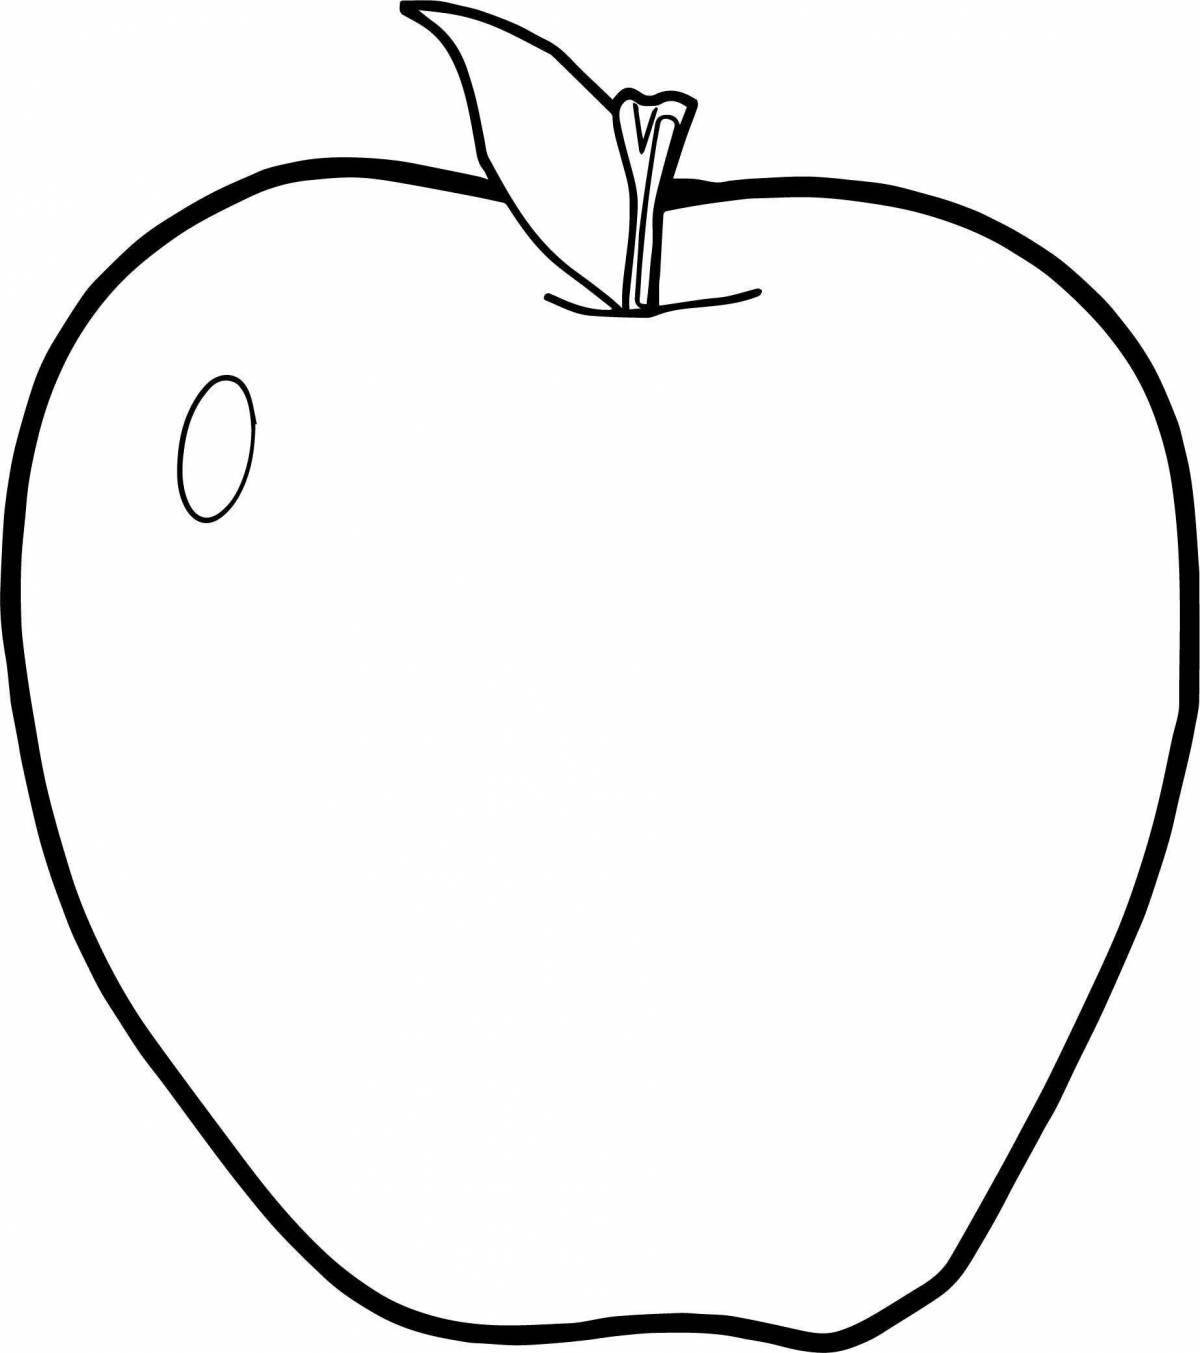 Colorful drawing of an apple for children